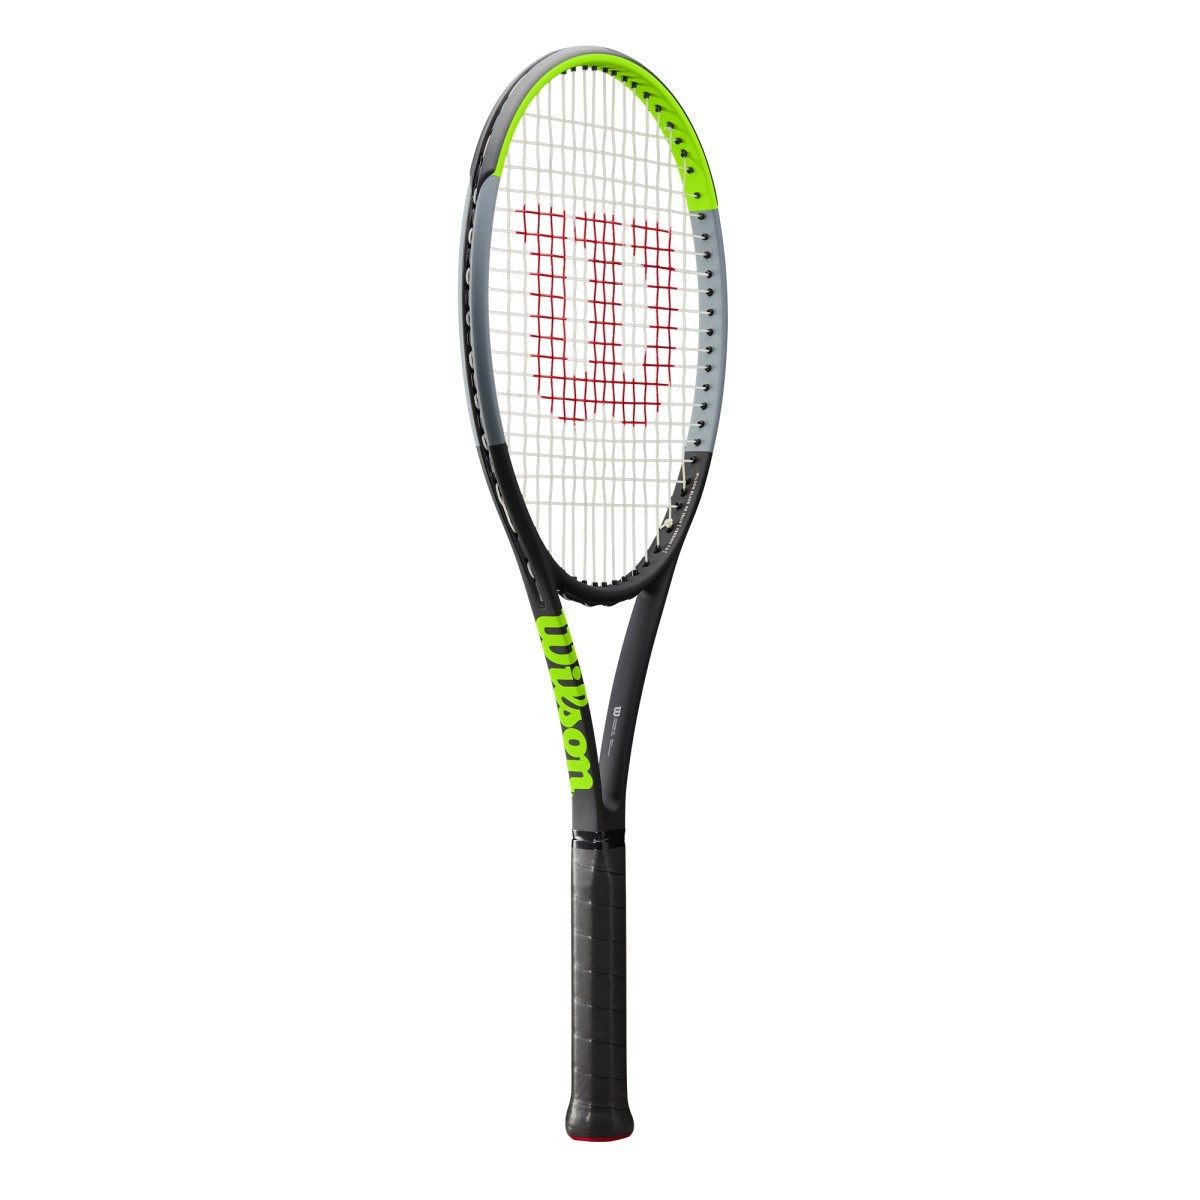 hastighed pause Tilsyneladende Wilson Blade 98 (16x19) v7.0 Tennis Racquet